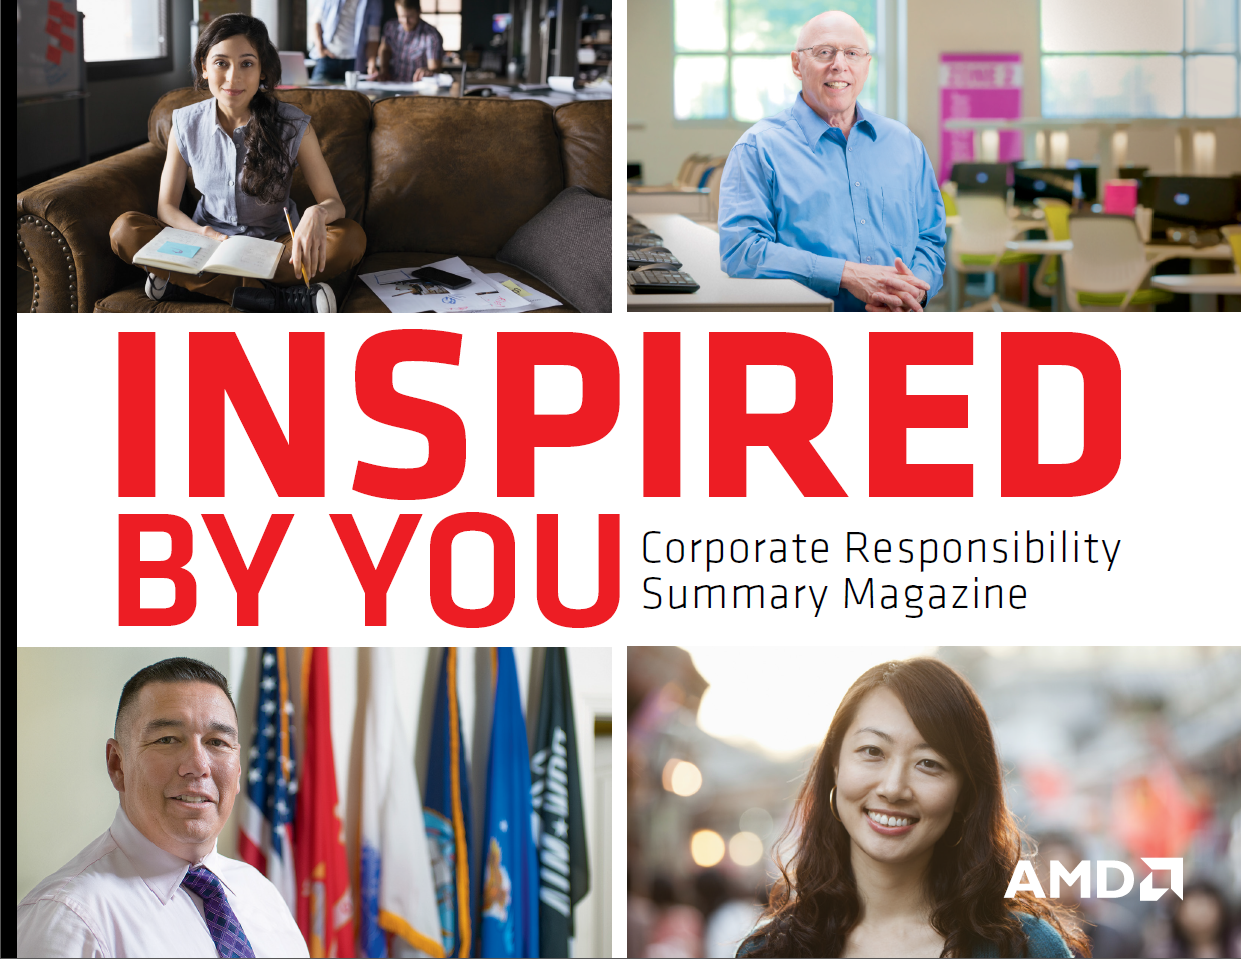 AMD_2015-2016_Corporate_Responsibility_Summary_Magazine_-_Inspired_By_You_-_cover_image.PNG